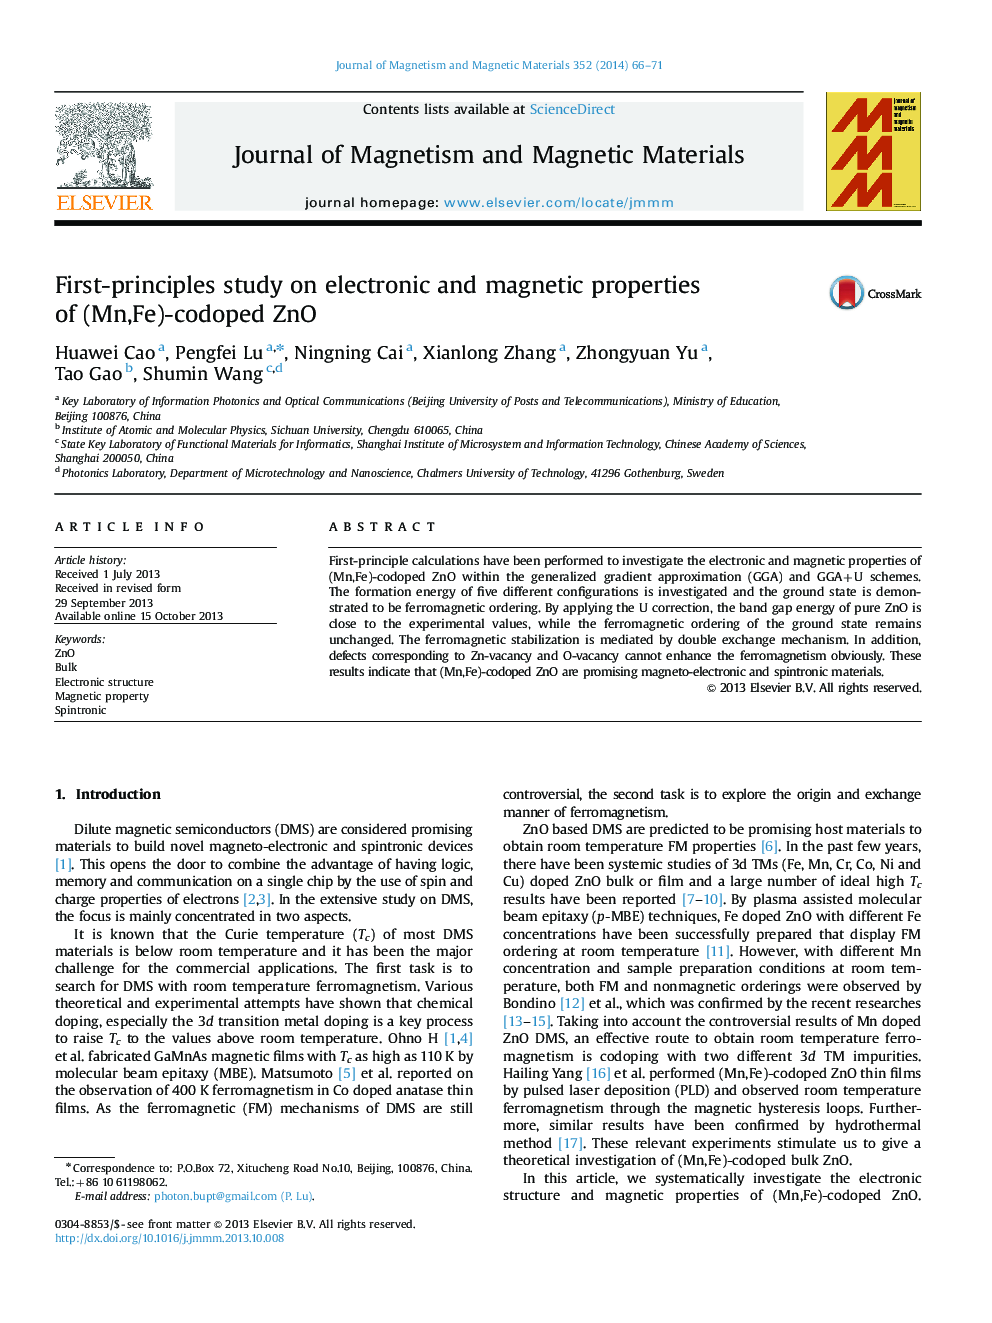 First-principles study on electronic and magnetic properties of (Mn,Fe)-codoped ZnO